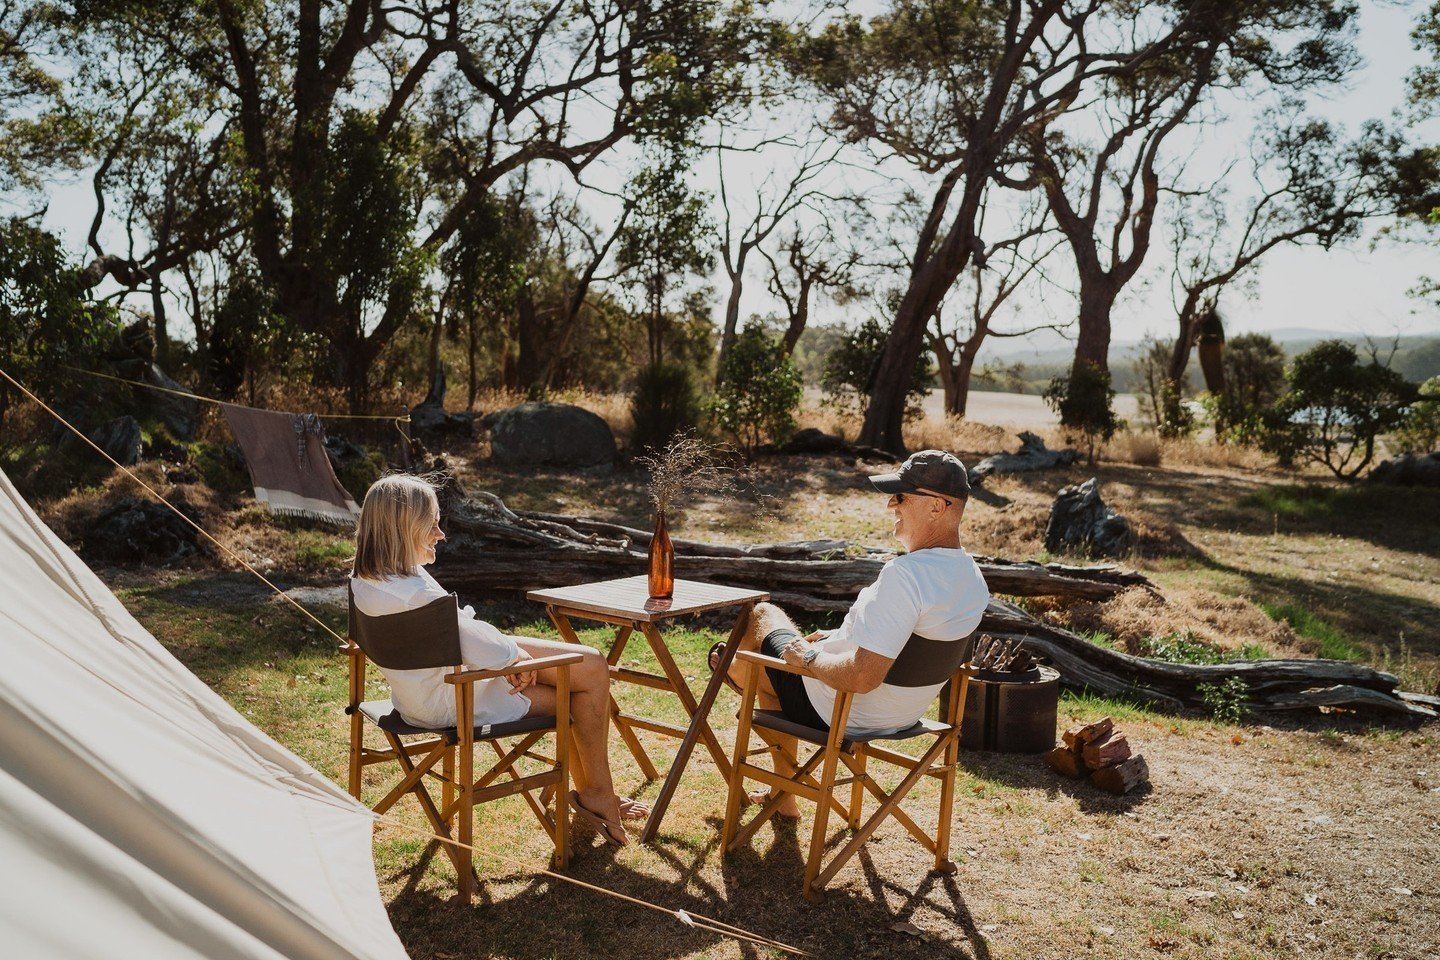 Experience camping redefined at NewFarm.⁠
⁠
Stay snug in our cabins, unwind in roomy bell tents, or bring your own gear for a classic camping adventure. Available during summer and Easter holidays &ndash; find your ideal escape amidst our natural hav